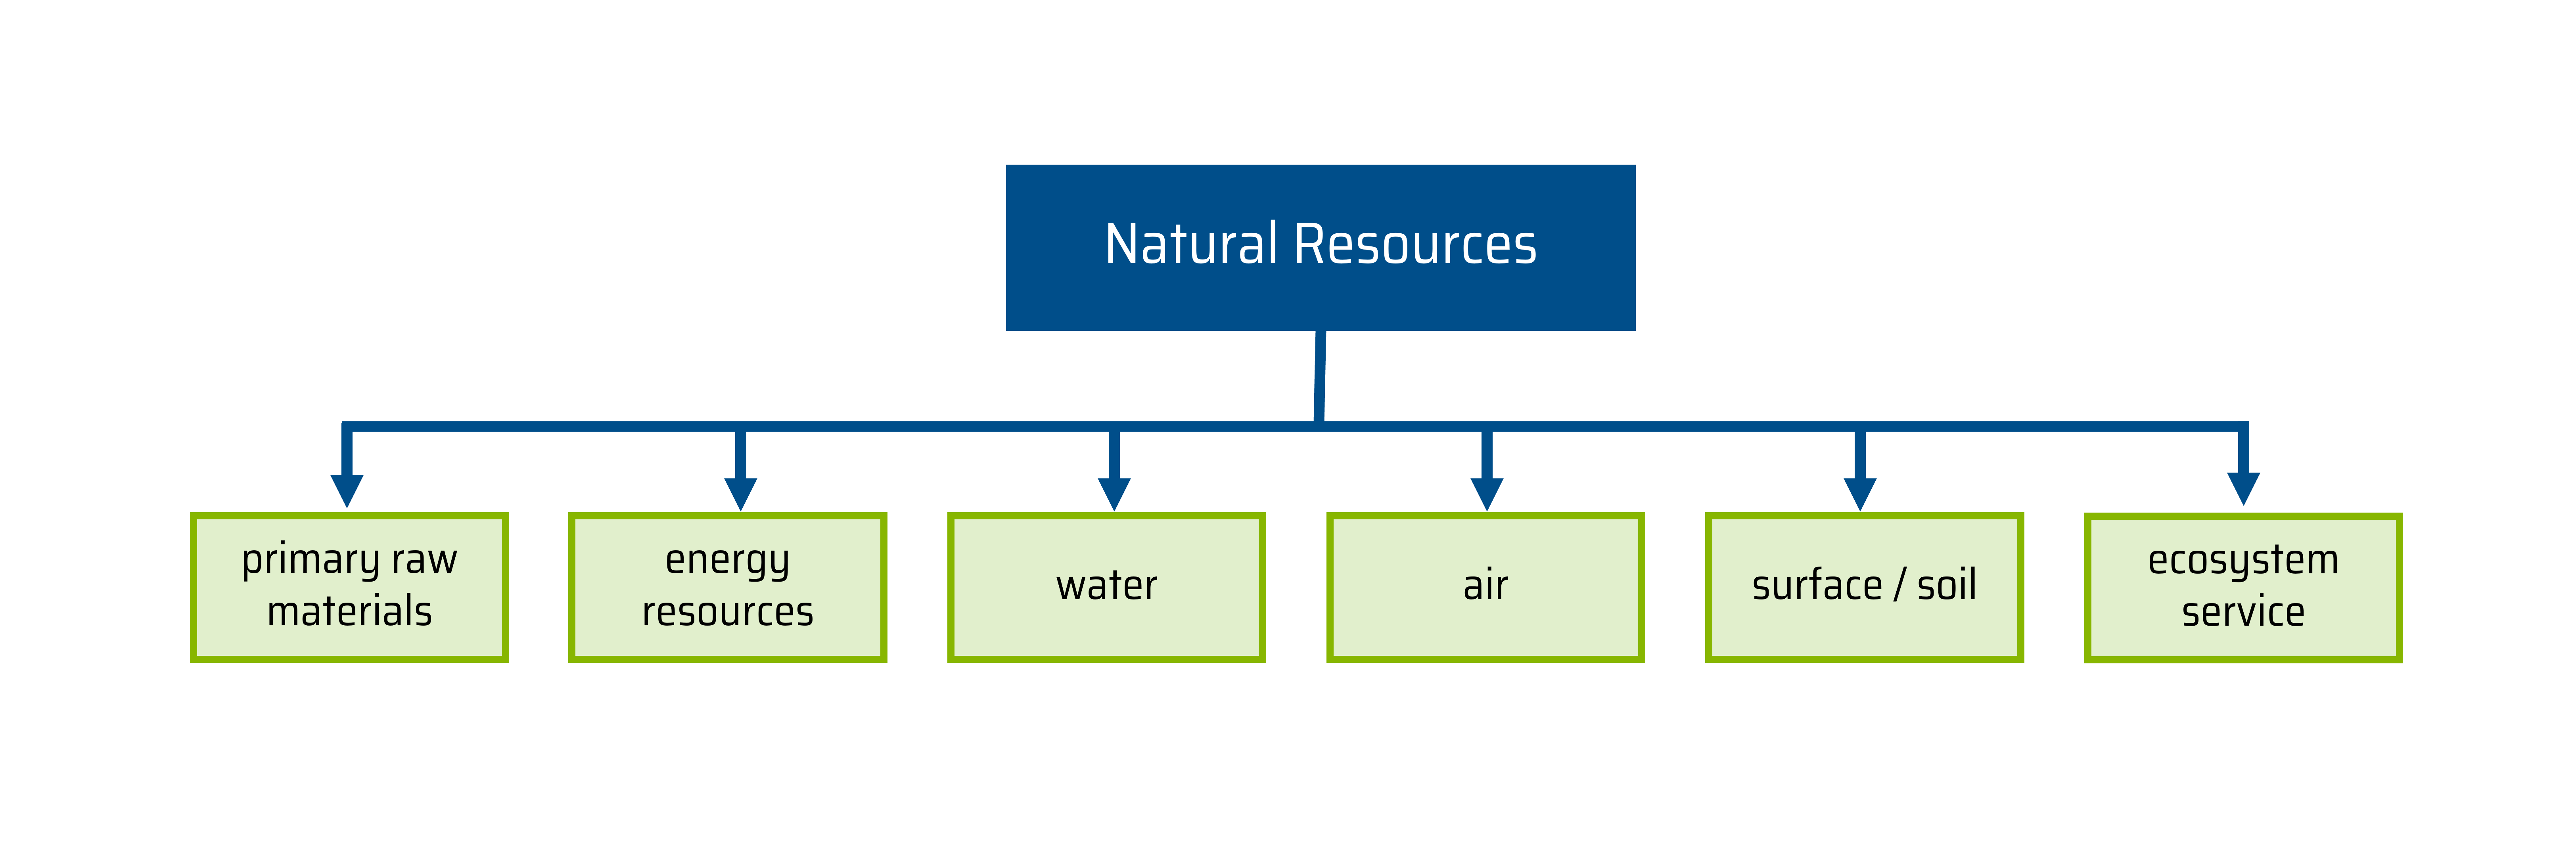 Based on VDI 4800 Sheet 1, the figure visualizes which raw materials are counted as natural resources. These include: Primary raw materials, energy resources, water, air, surface/soil and ecosystem services.